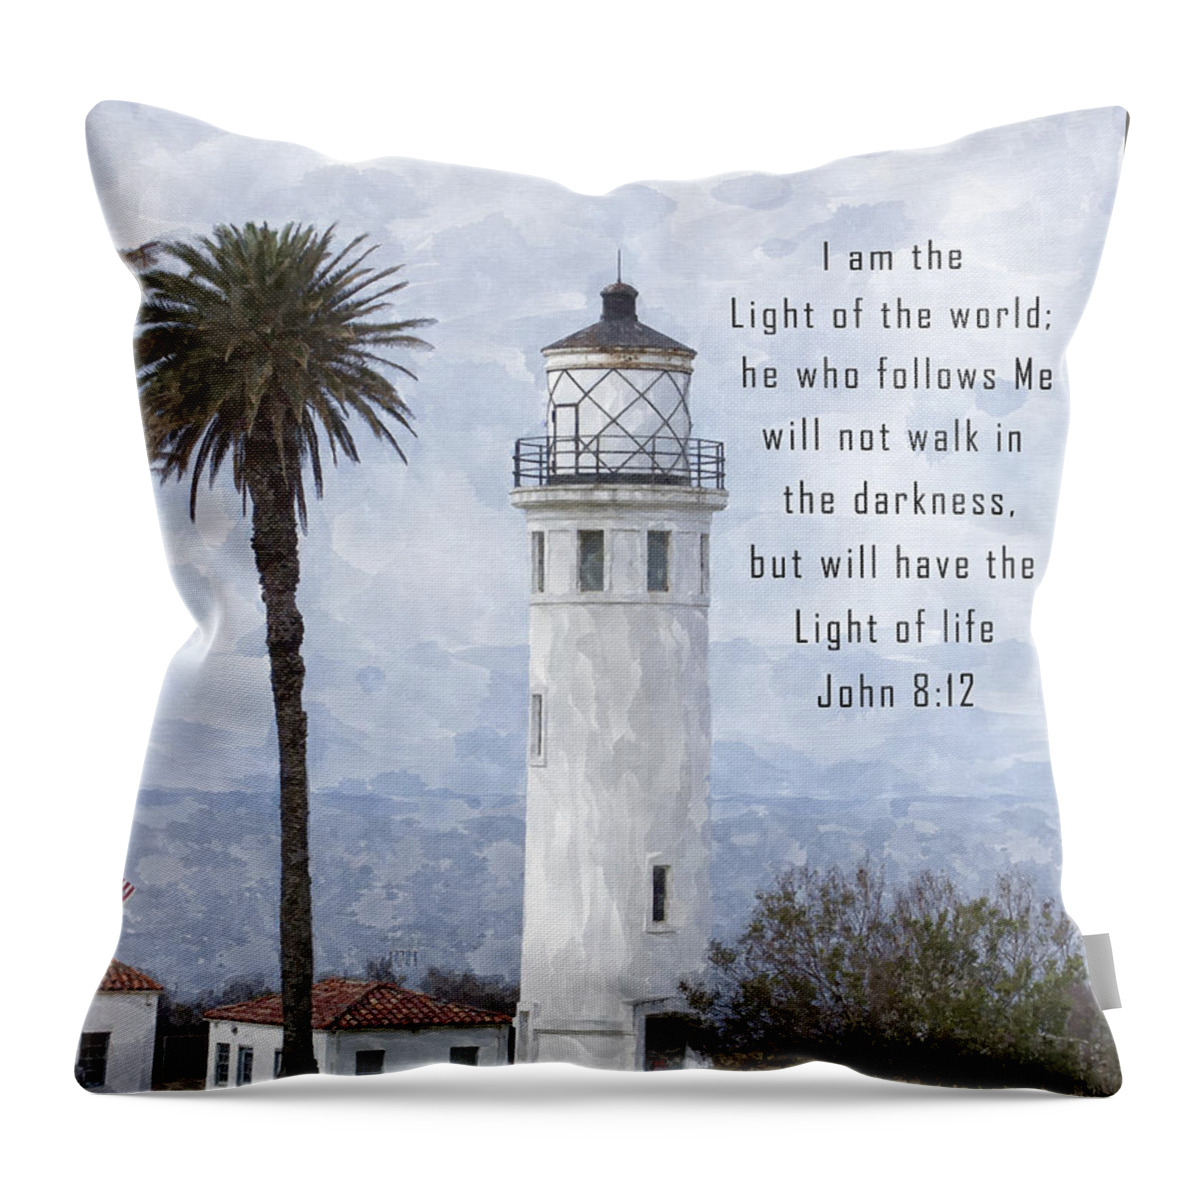 Bible Verse Throw Pillow featuring the digital art I am the Light of the World by Anthony Murphy